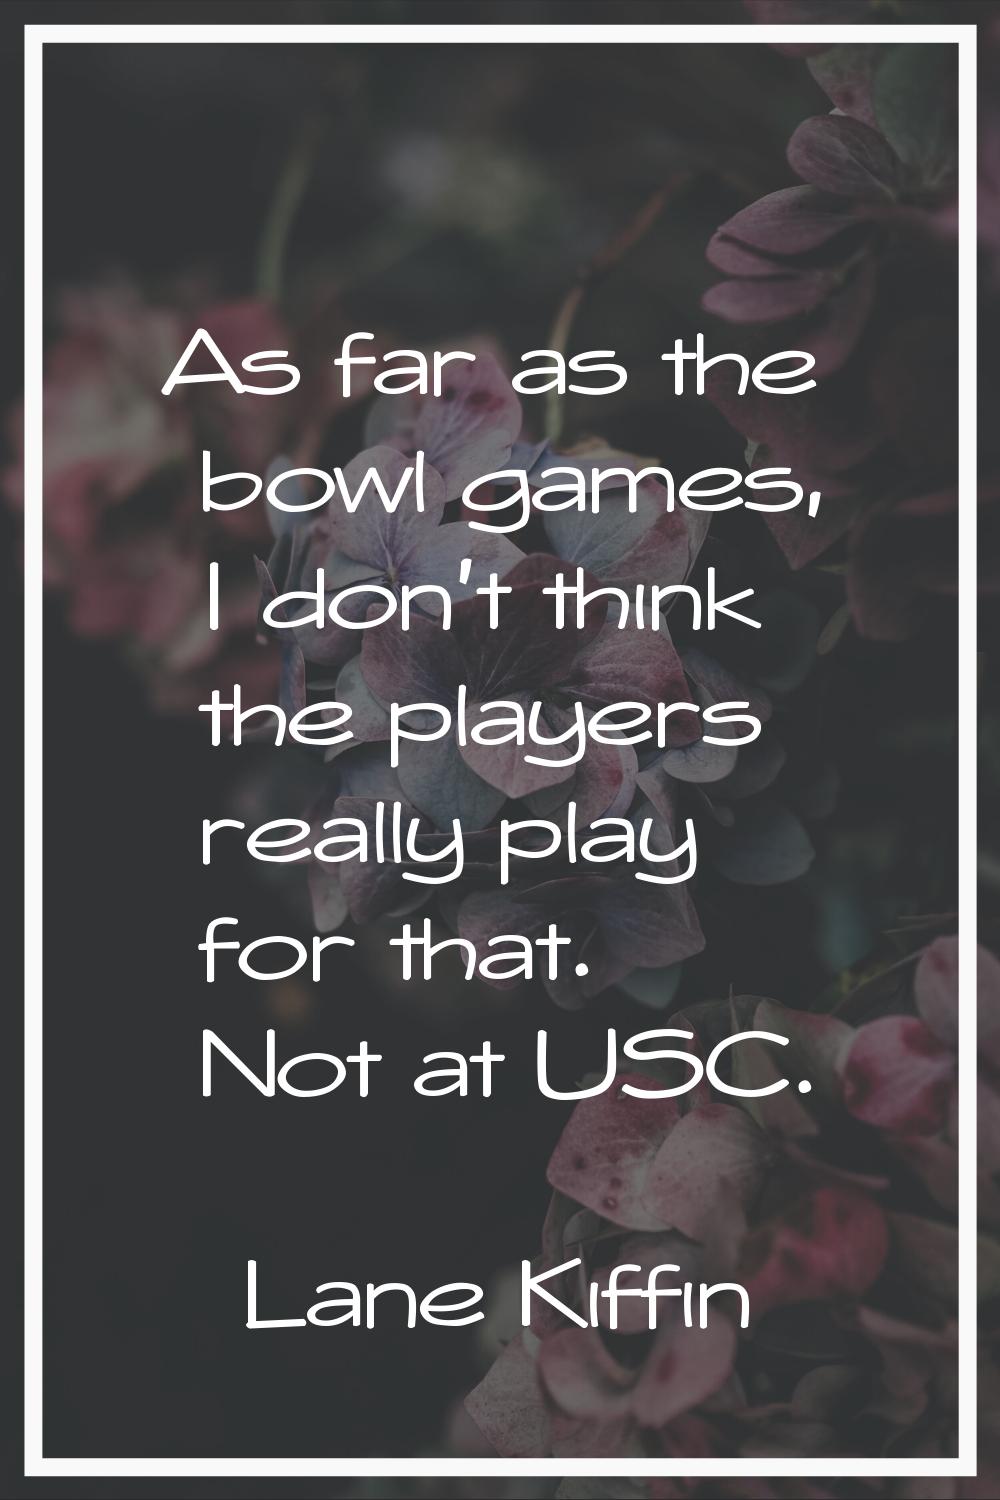 As far as the bowl games, I don't think the players really play for that. Not at USC.